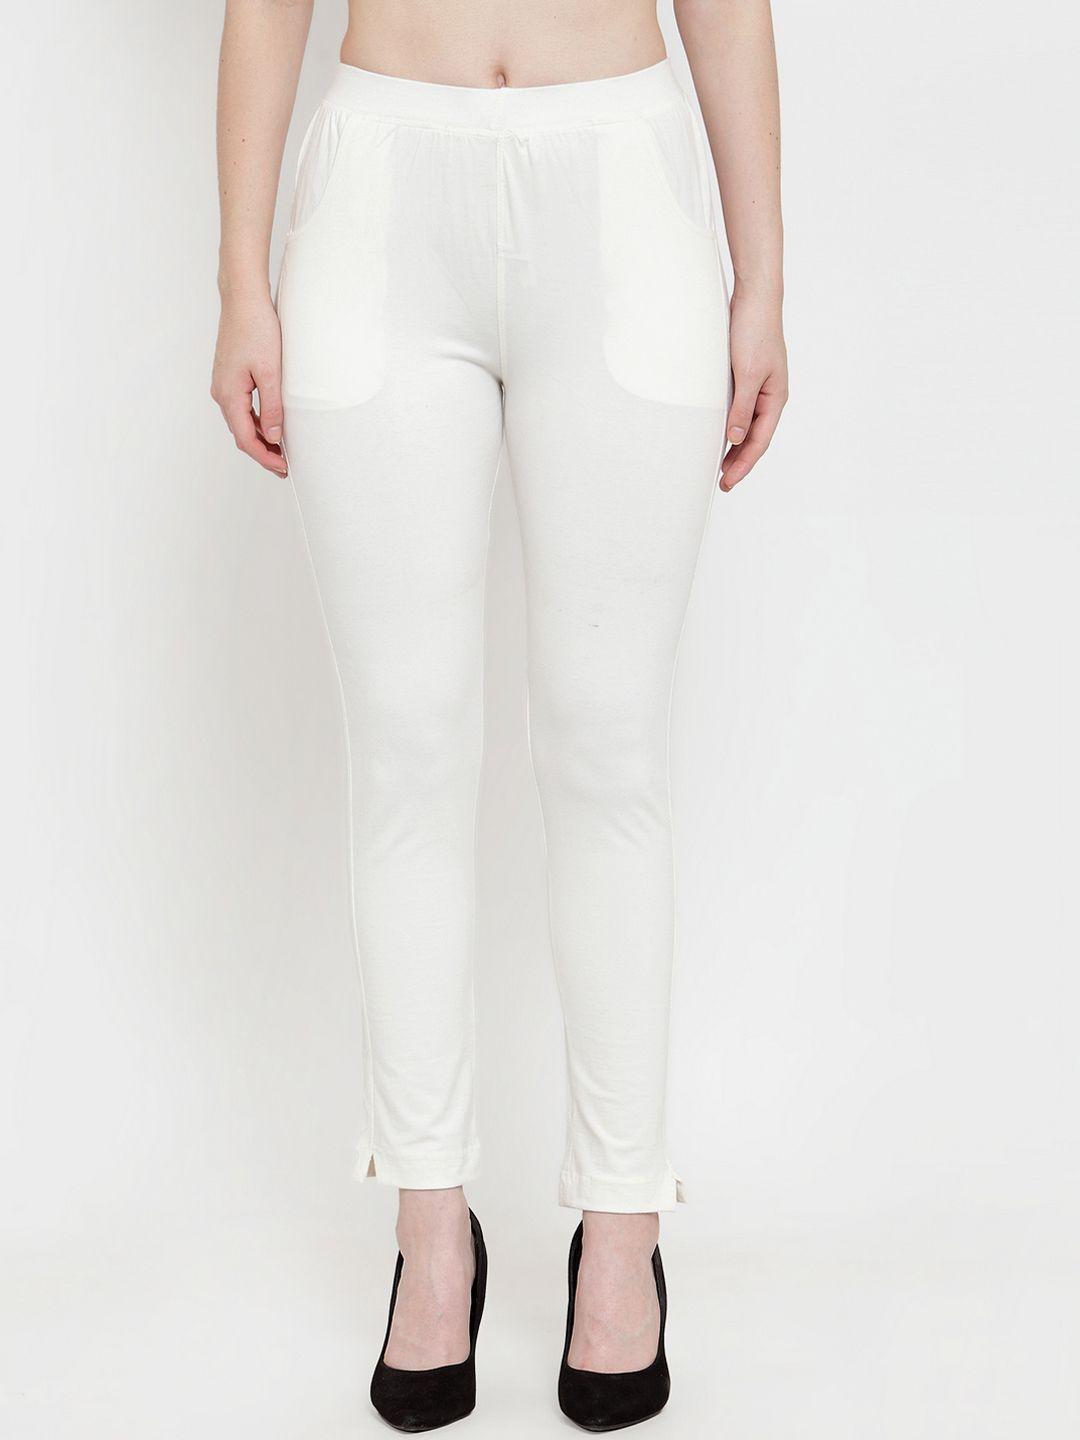 tag 7 women off white solid ankle-length leggings